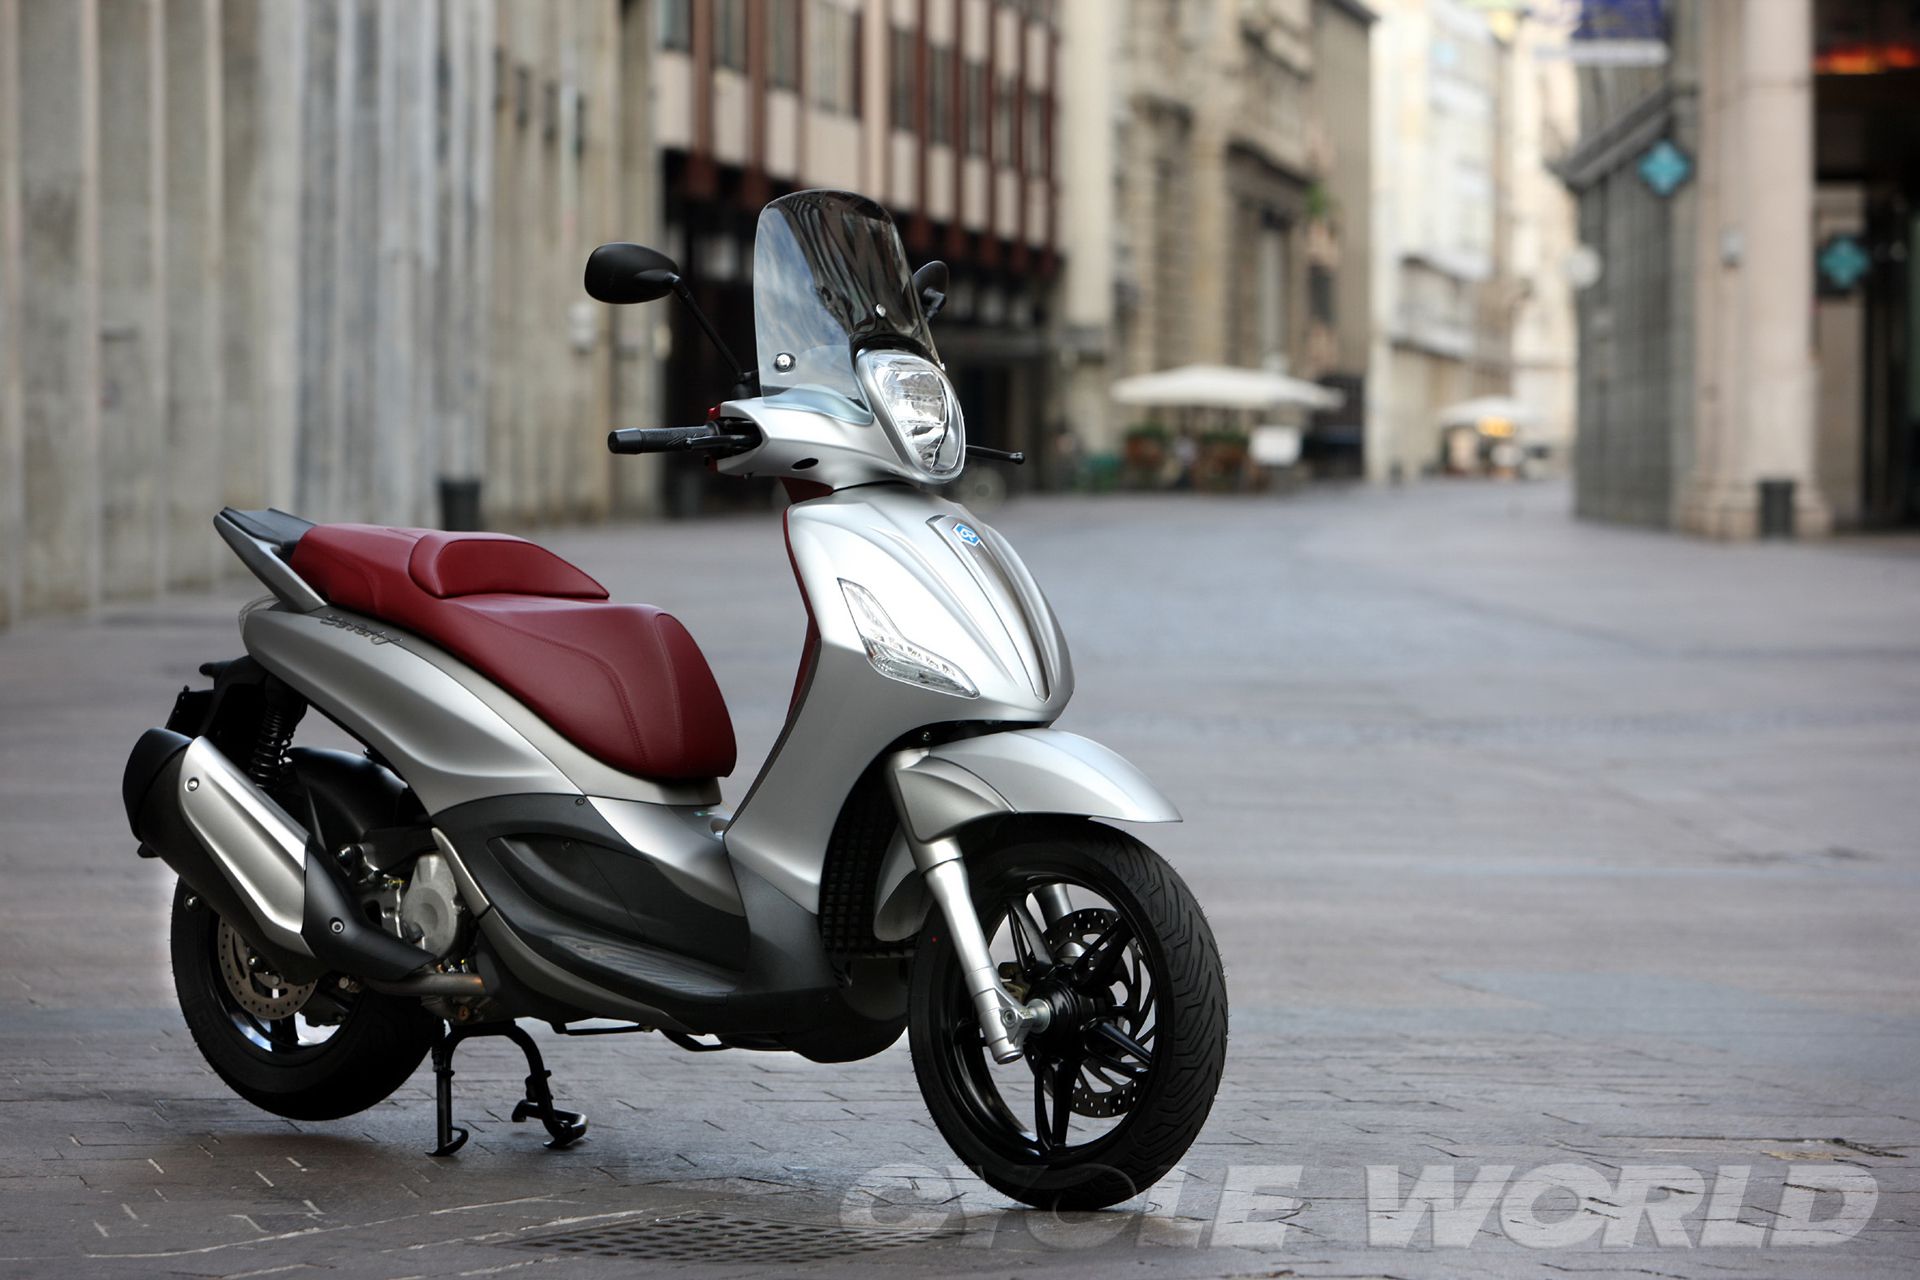 2012 Piaggio Beverly Sport Touring First Ride Review- Piaggio Scooters